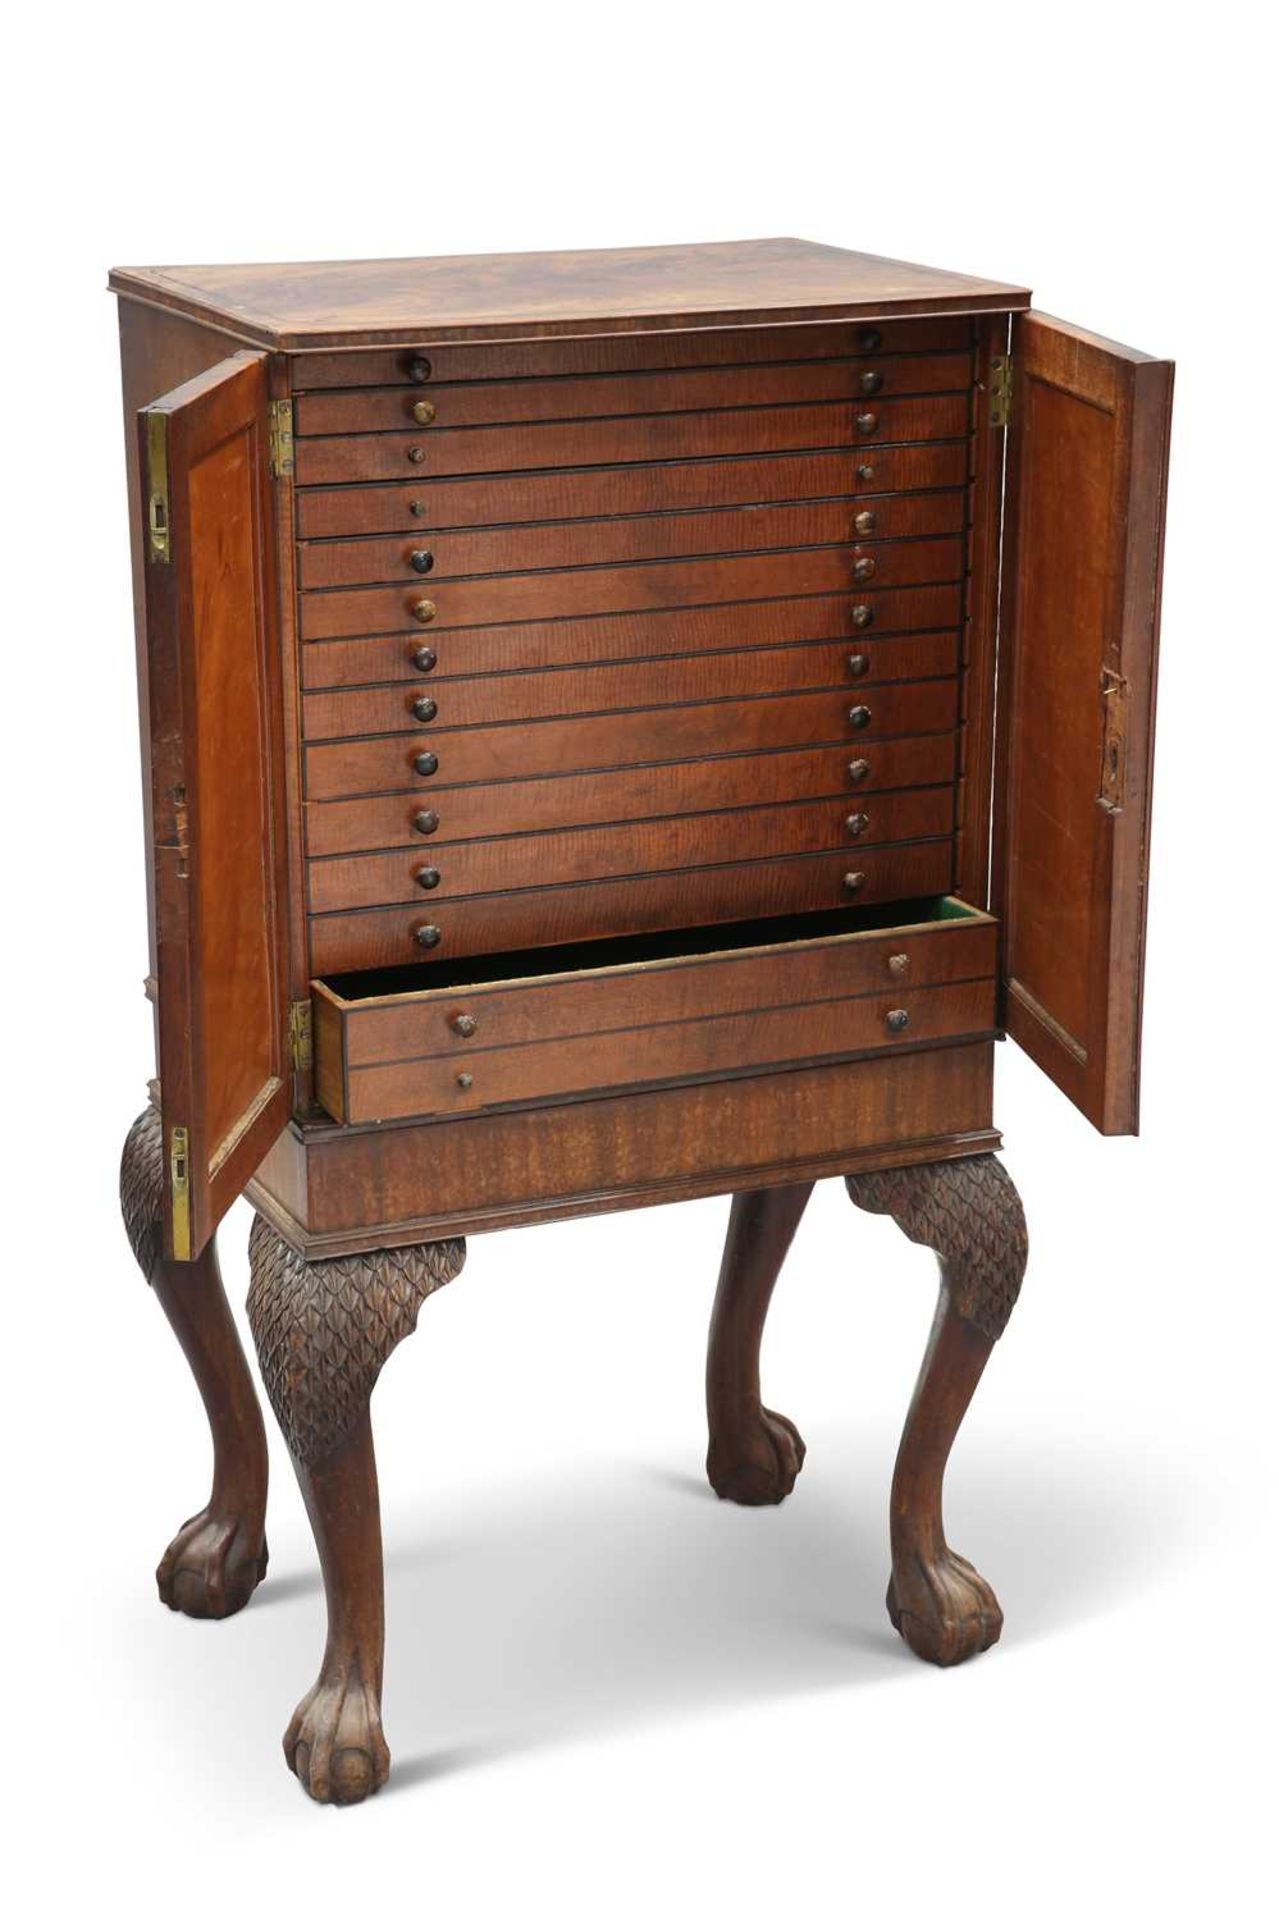 AN EBONY-STRUNG MAHOGANY COLLECTOR'S CABINET, IN IRISH STYLE, 18TH CENTURY AND LATER - Image 2 of 2